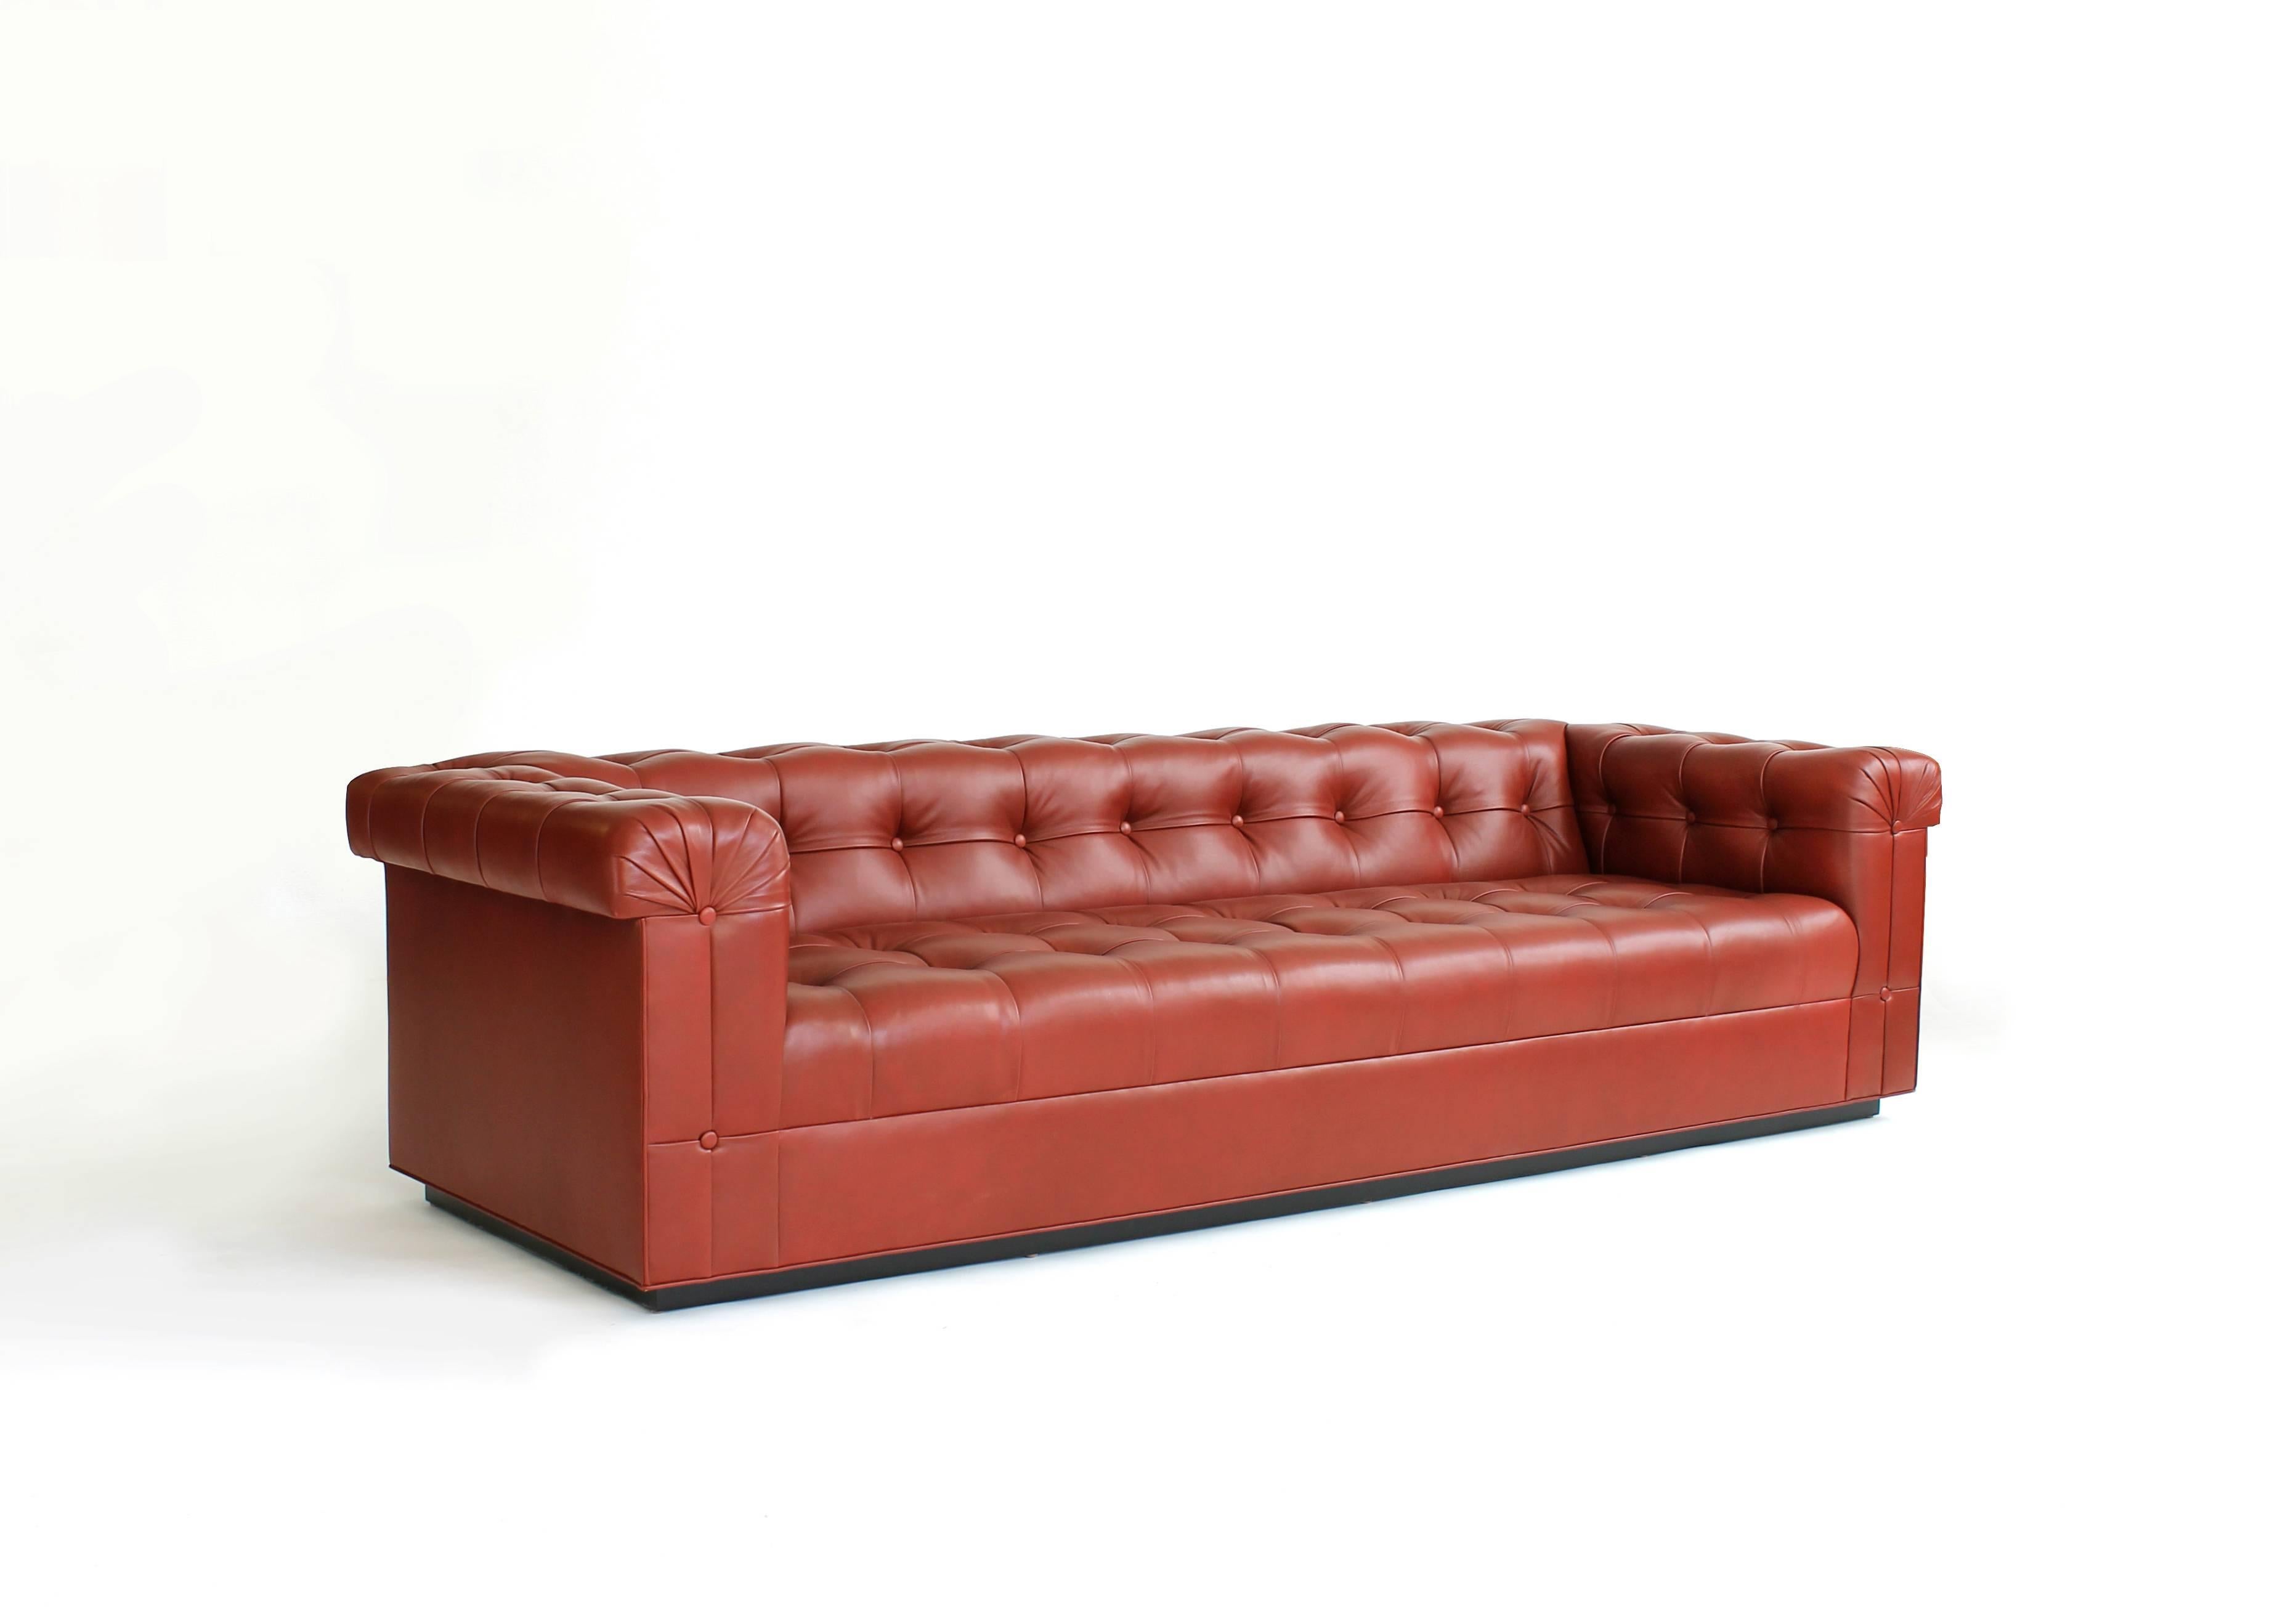 This custom sofa was made for new order by one of Chicago's finest furniture makers. It is loosely based on the Edward Wormley Party sofa. Sale price is for the red floor model only.
  